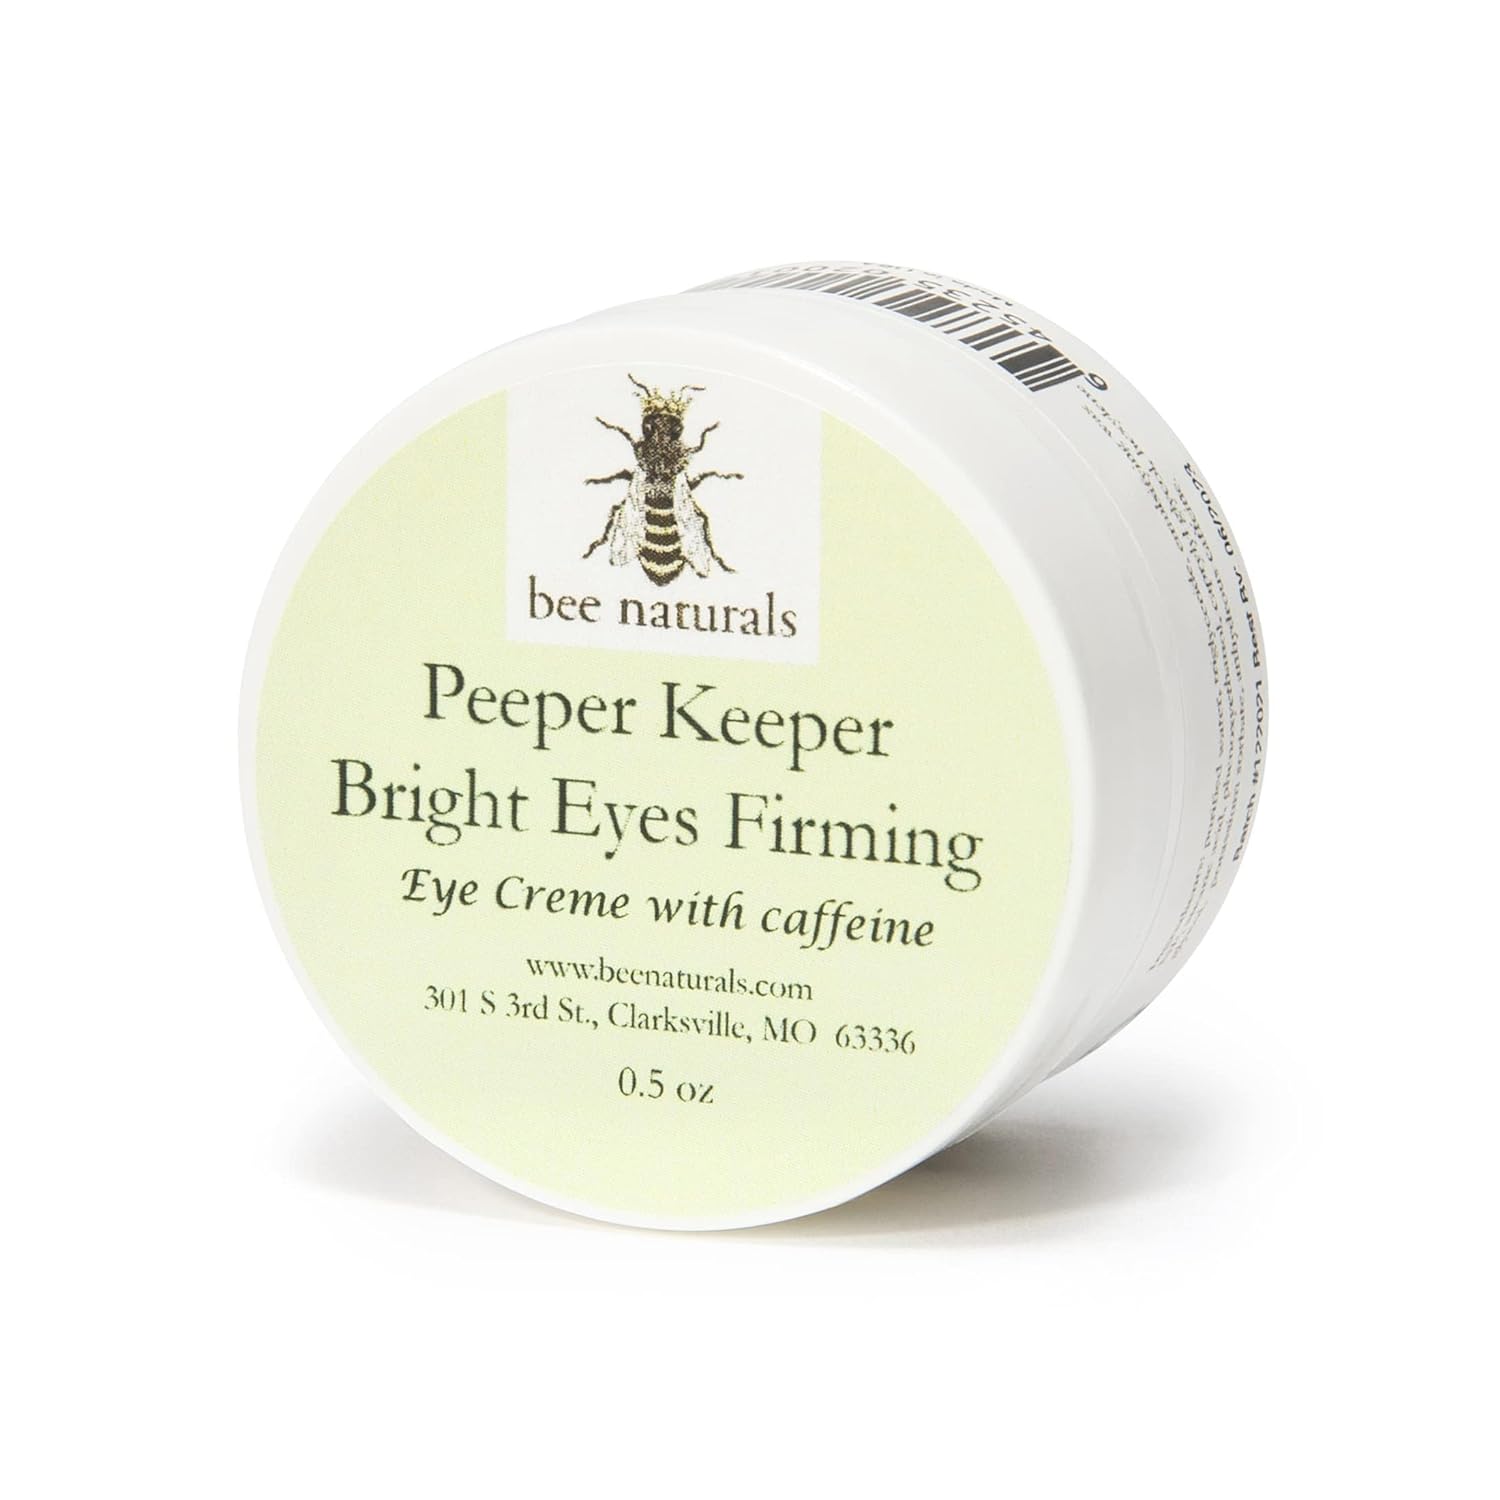 Bee Naturals Peeper Keeper Bright Eyes Firming Crème - Caffeine Enriched for Puffy Eye Reduction - Gentle Daily Use After Cleansing - Caution for Caffeine Sensitivity